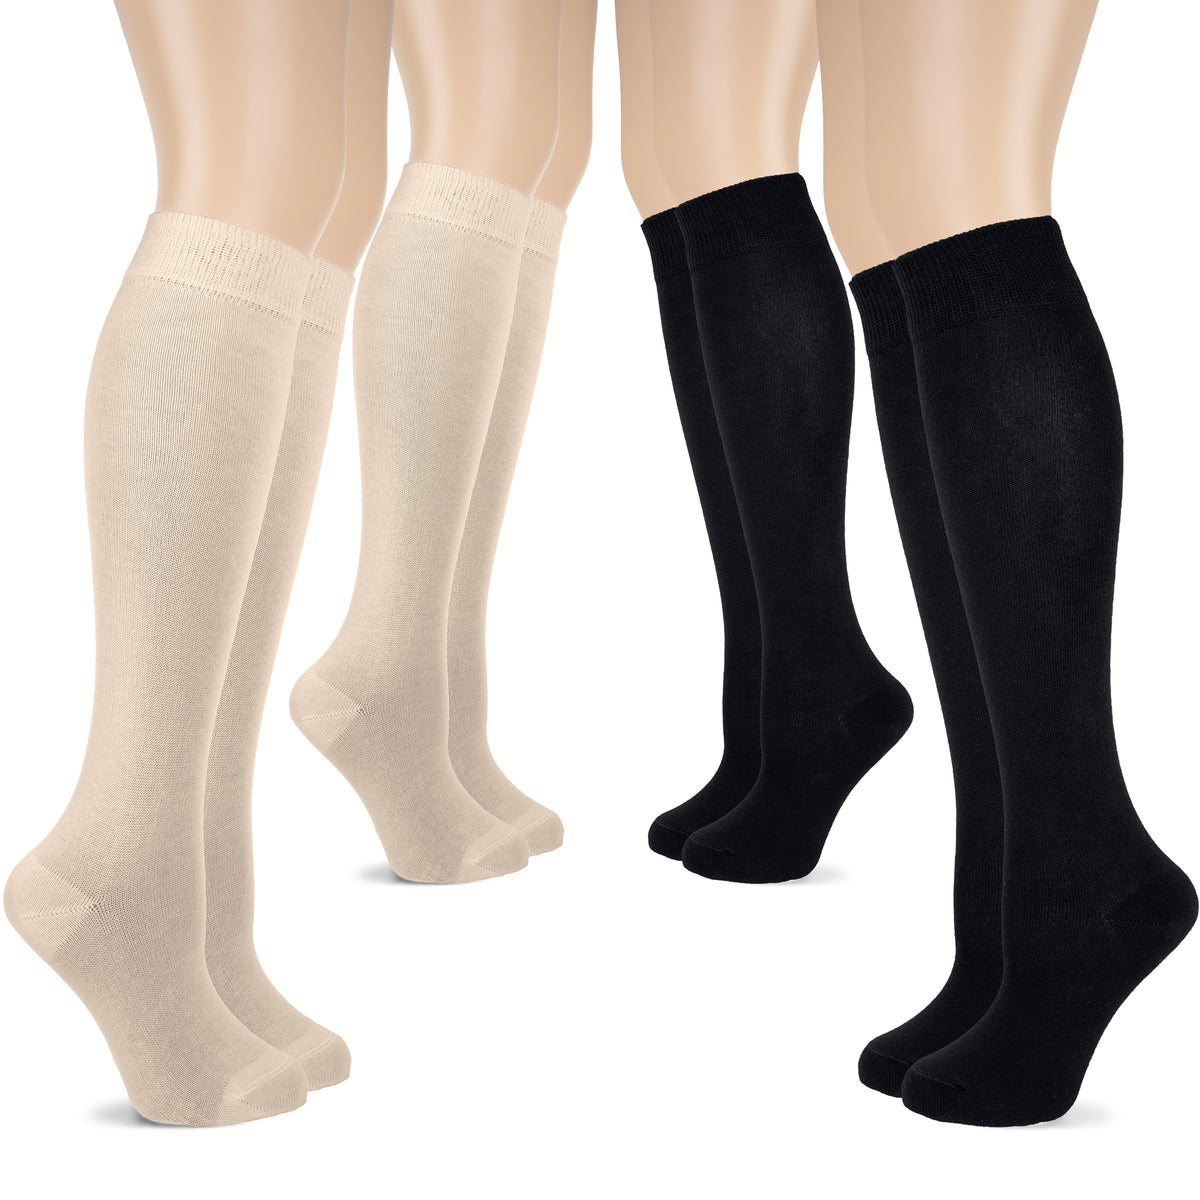 Four sets of knee-high socks for women, crafted from cotton and presented in beige and black shades, are shown in this image.